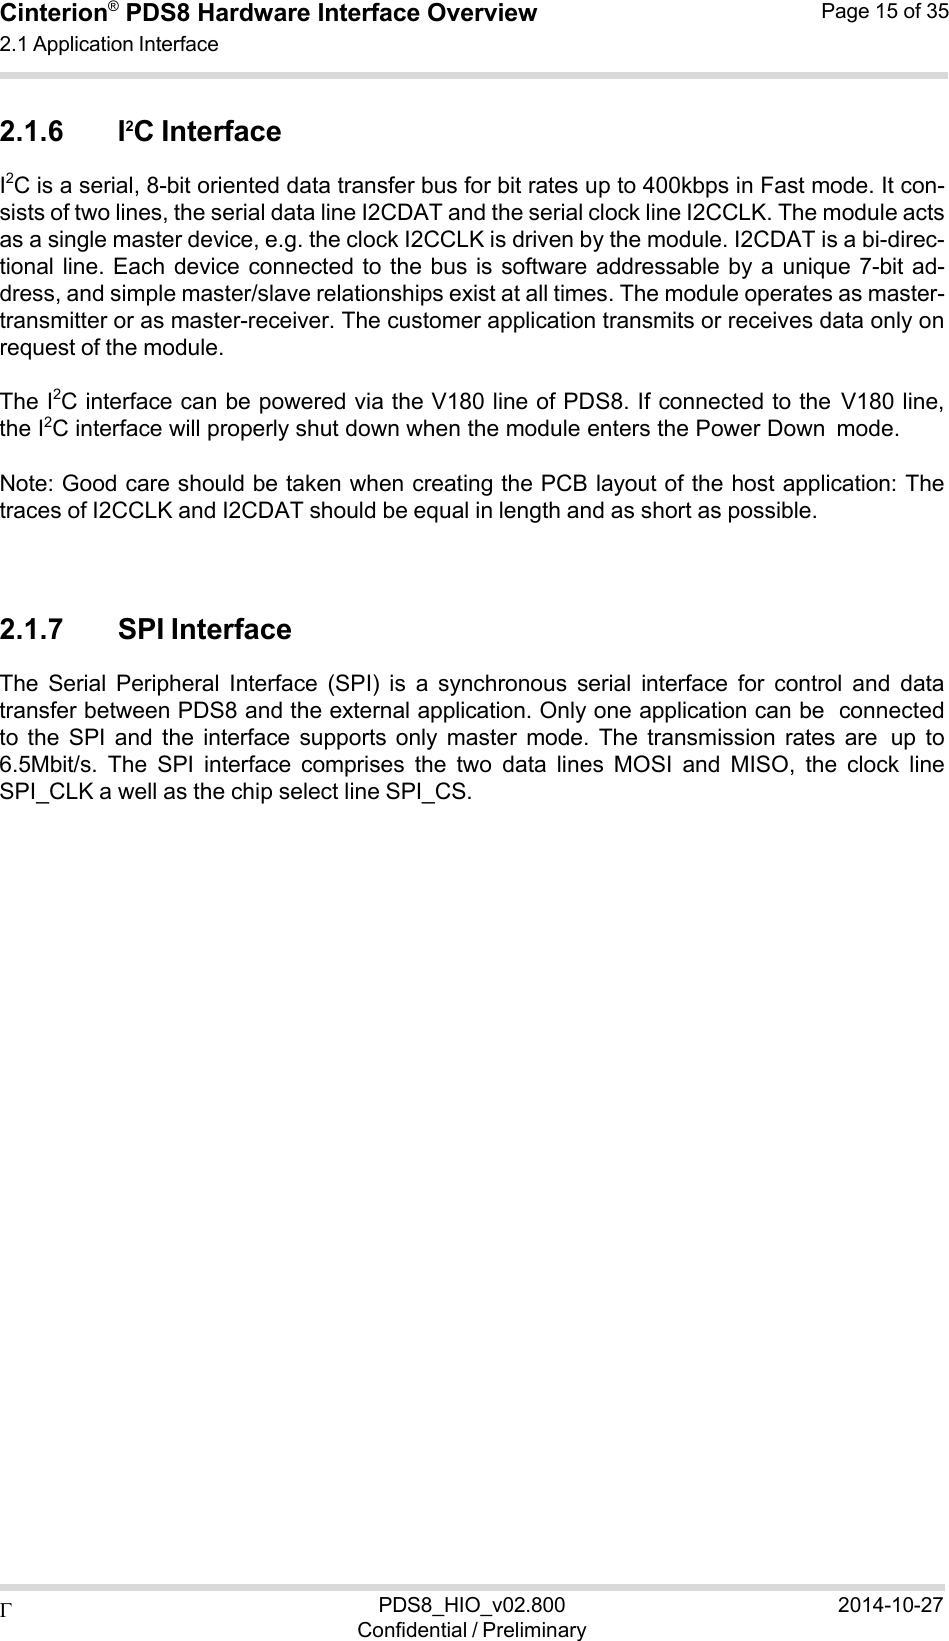  PDS8_HIO_v02.800Confidential / Preliminary2014-10-27Cinterion®  PDS8 Hardware Interface Overview 2.1 Application Interface Page 15 of 35   2.1.6 I2C Interface I2C is a serial, 8-bit oriented data transfer bus for bit rates up to 400kbps in Fast mode. It con- sists of two lines, the serial data line I2CDAT and the serial clock line I2CCLK. The module acts as a single master device, e.g. the clock I2CCLK is driven by the module. I2CDAT is a bi-direc- tional line. Each  device  connected to the bus  is  software addressable by  a  unique 7-bit  ad- dress, and simple master/slave relationships exist at all times. The module operates as master- transmitter or as master-receiver. The customer application transmits or receives data only on request of the module.  The I2C interface can be powered via the V180 line of PDS8. If connected to the V180 line, the I2C interface will properly shut down when the module enters the Power Down mode.  Note: Good care should be taken when creating the PCB layout of the host application: The traces of I2CCLK and I2CDAT should be equal in length and as short as possible.    2.1.7 SPI Interface The  Serial  Peripheral  Interface  (SPI)  is  a  synchronous  serial  interface  for  control  and  data transfer between PDS8 and the external application. Only one application can be connected to  the  SPI  and  the  interface  supports  only  master  mode.  The  transmission  rates are up  to 6.5Mbit/s.  The  SPI  interface  comprises  the  two  data  lines  MOSI  and  MISO,  the  clock  line SPI_CLK a well as the chip select line SPI_CS. 